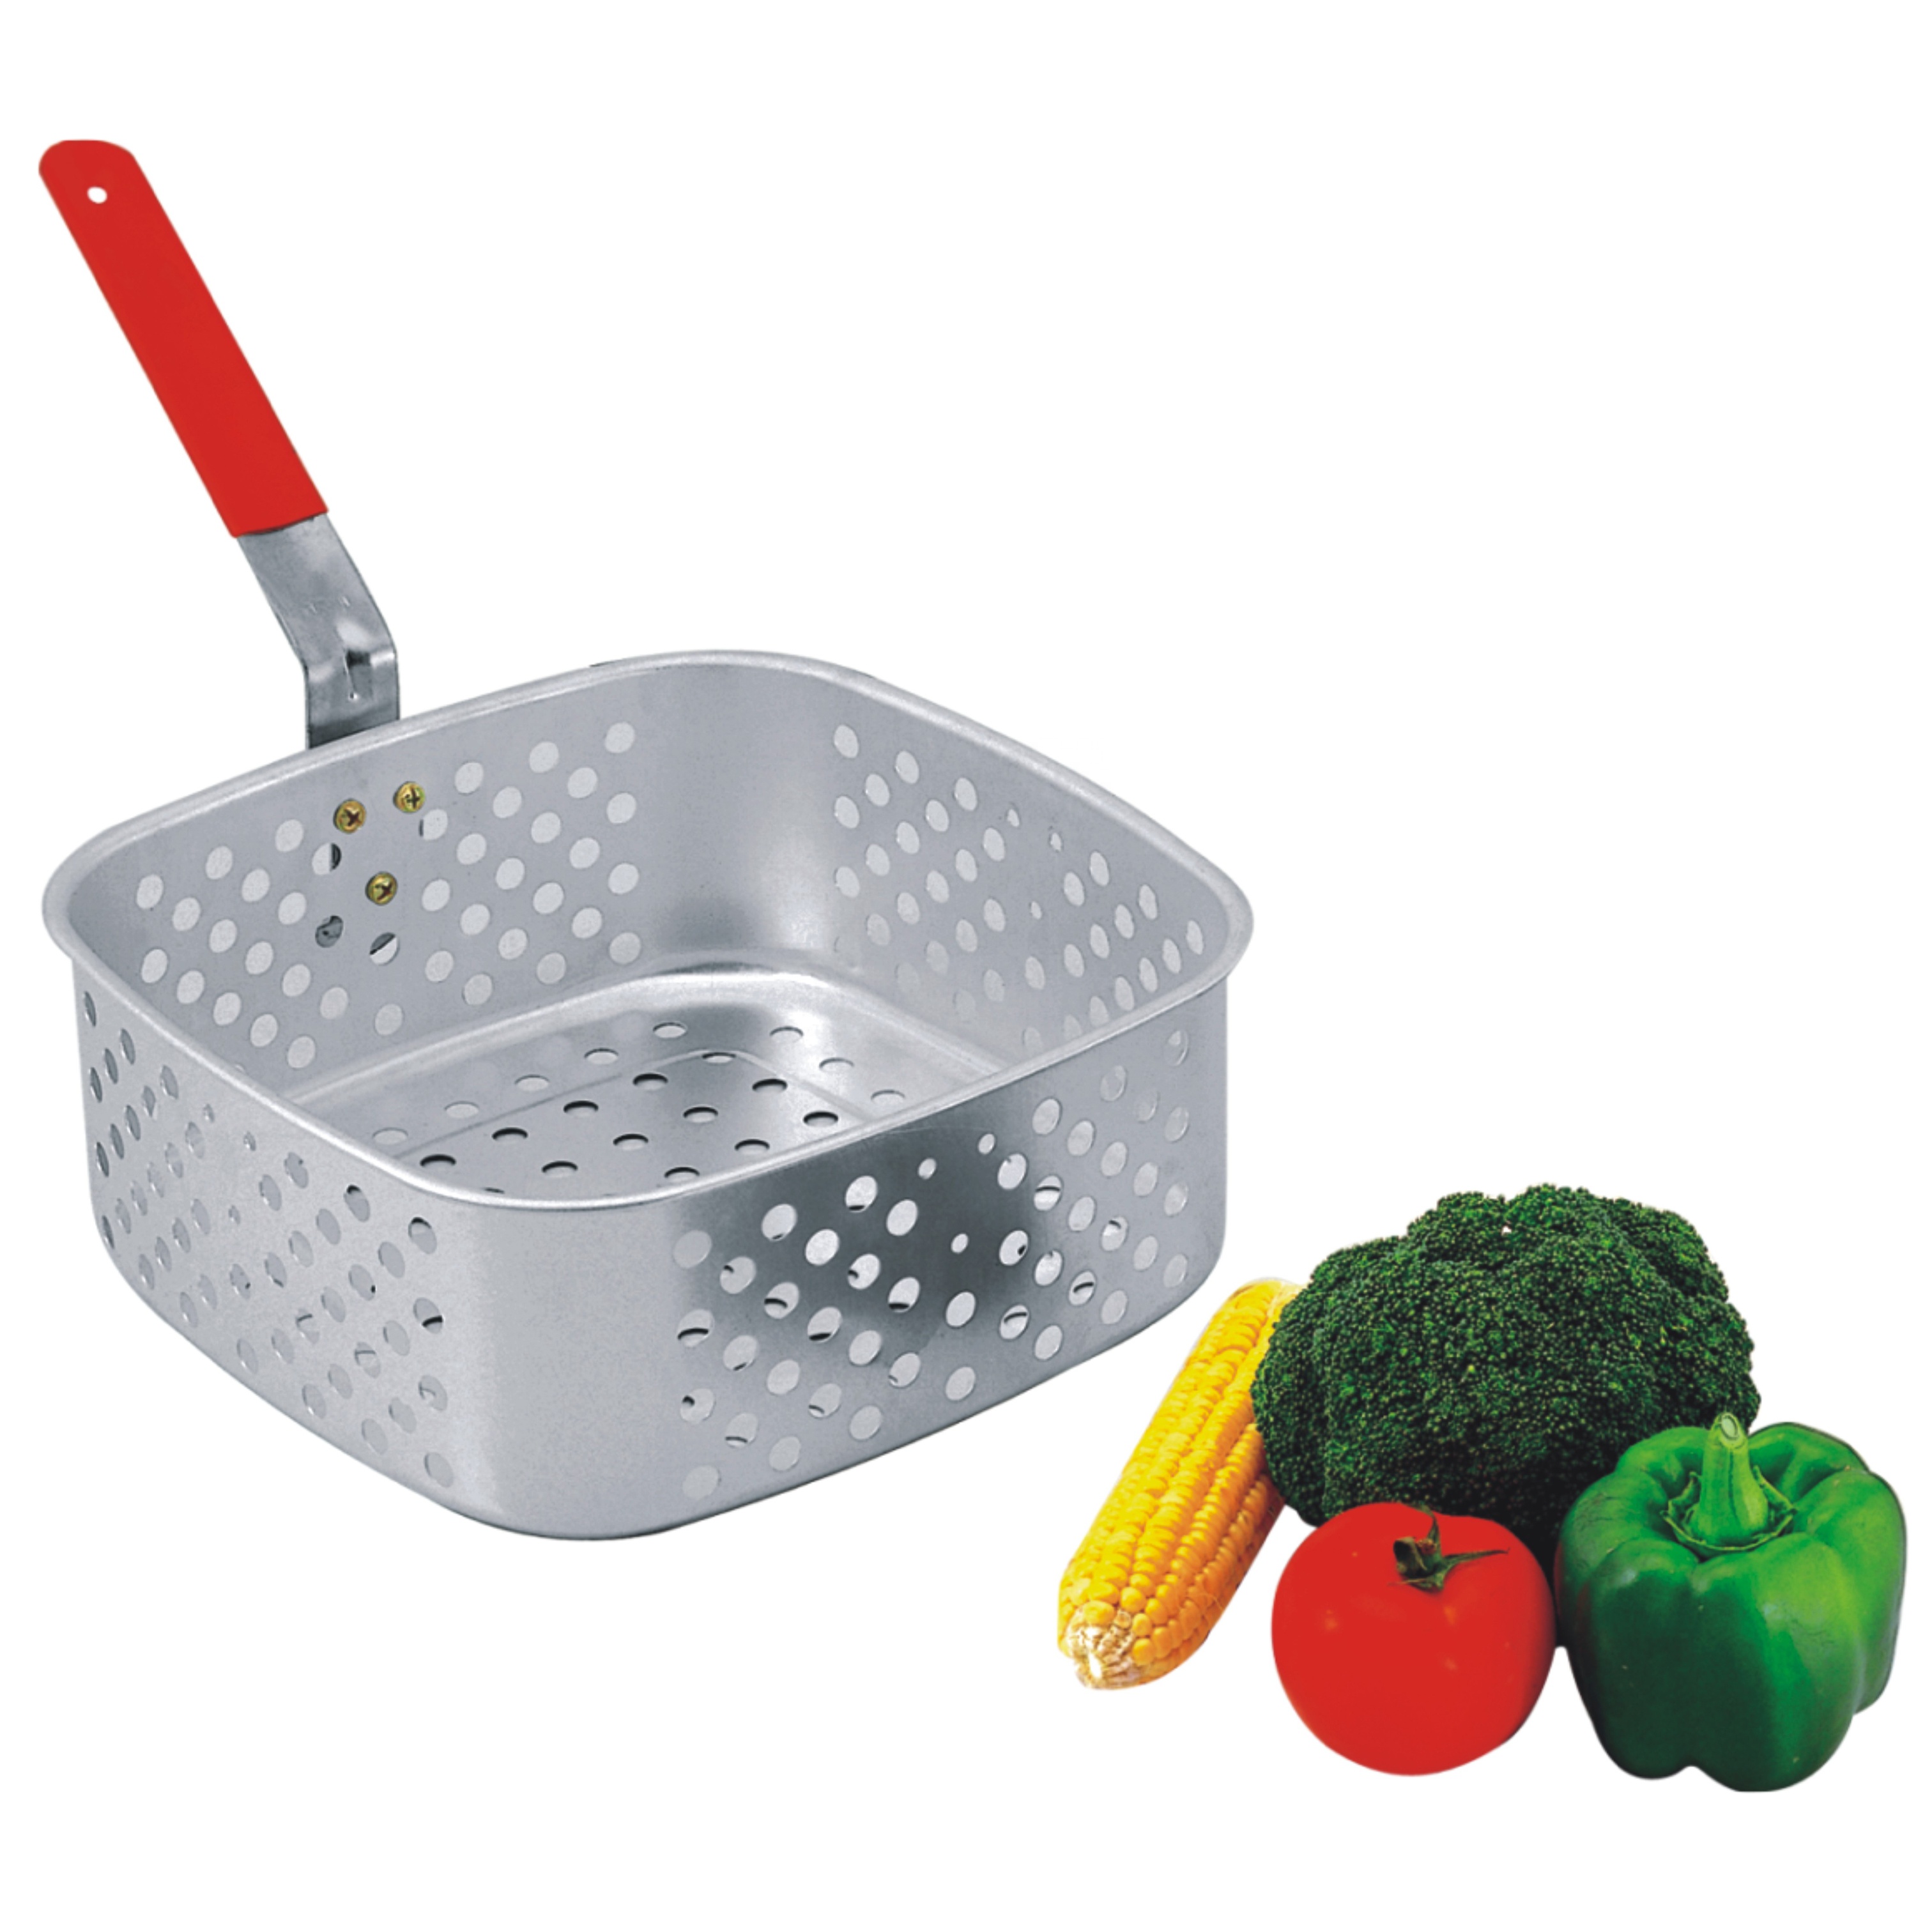 Square Aluminum Fish Frying Pan Delivery Basket Cookware Set